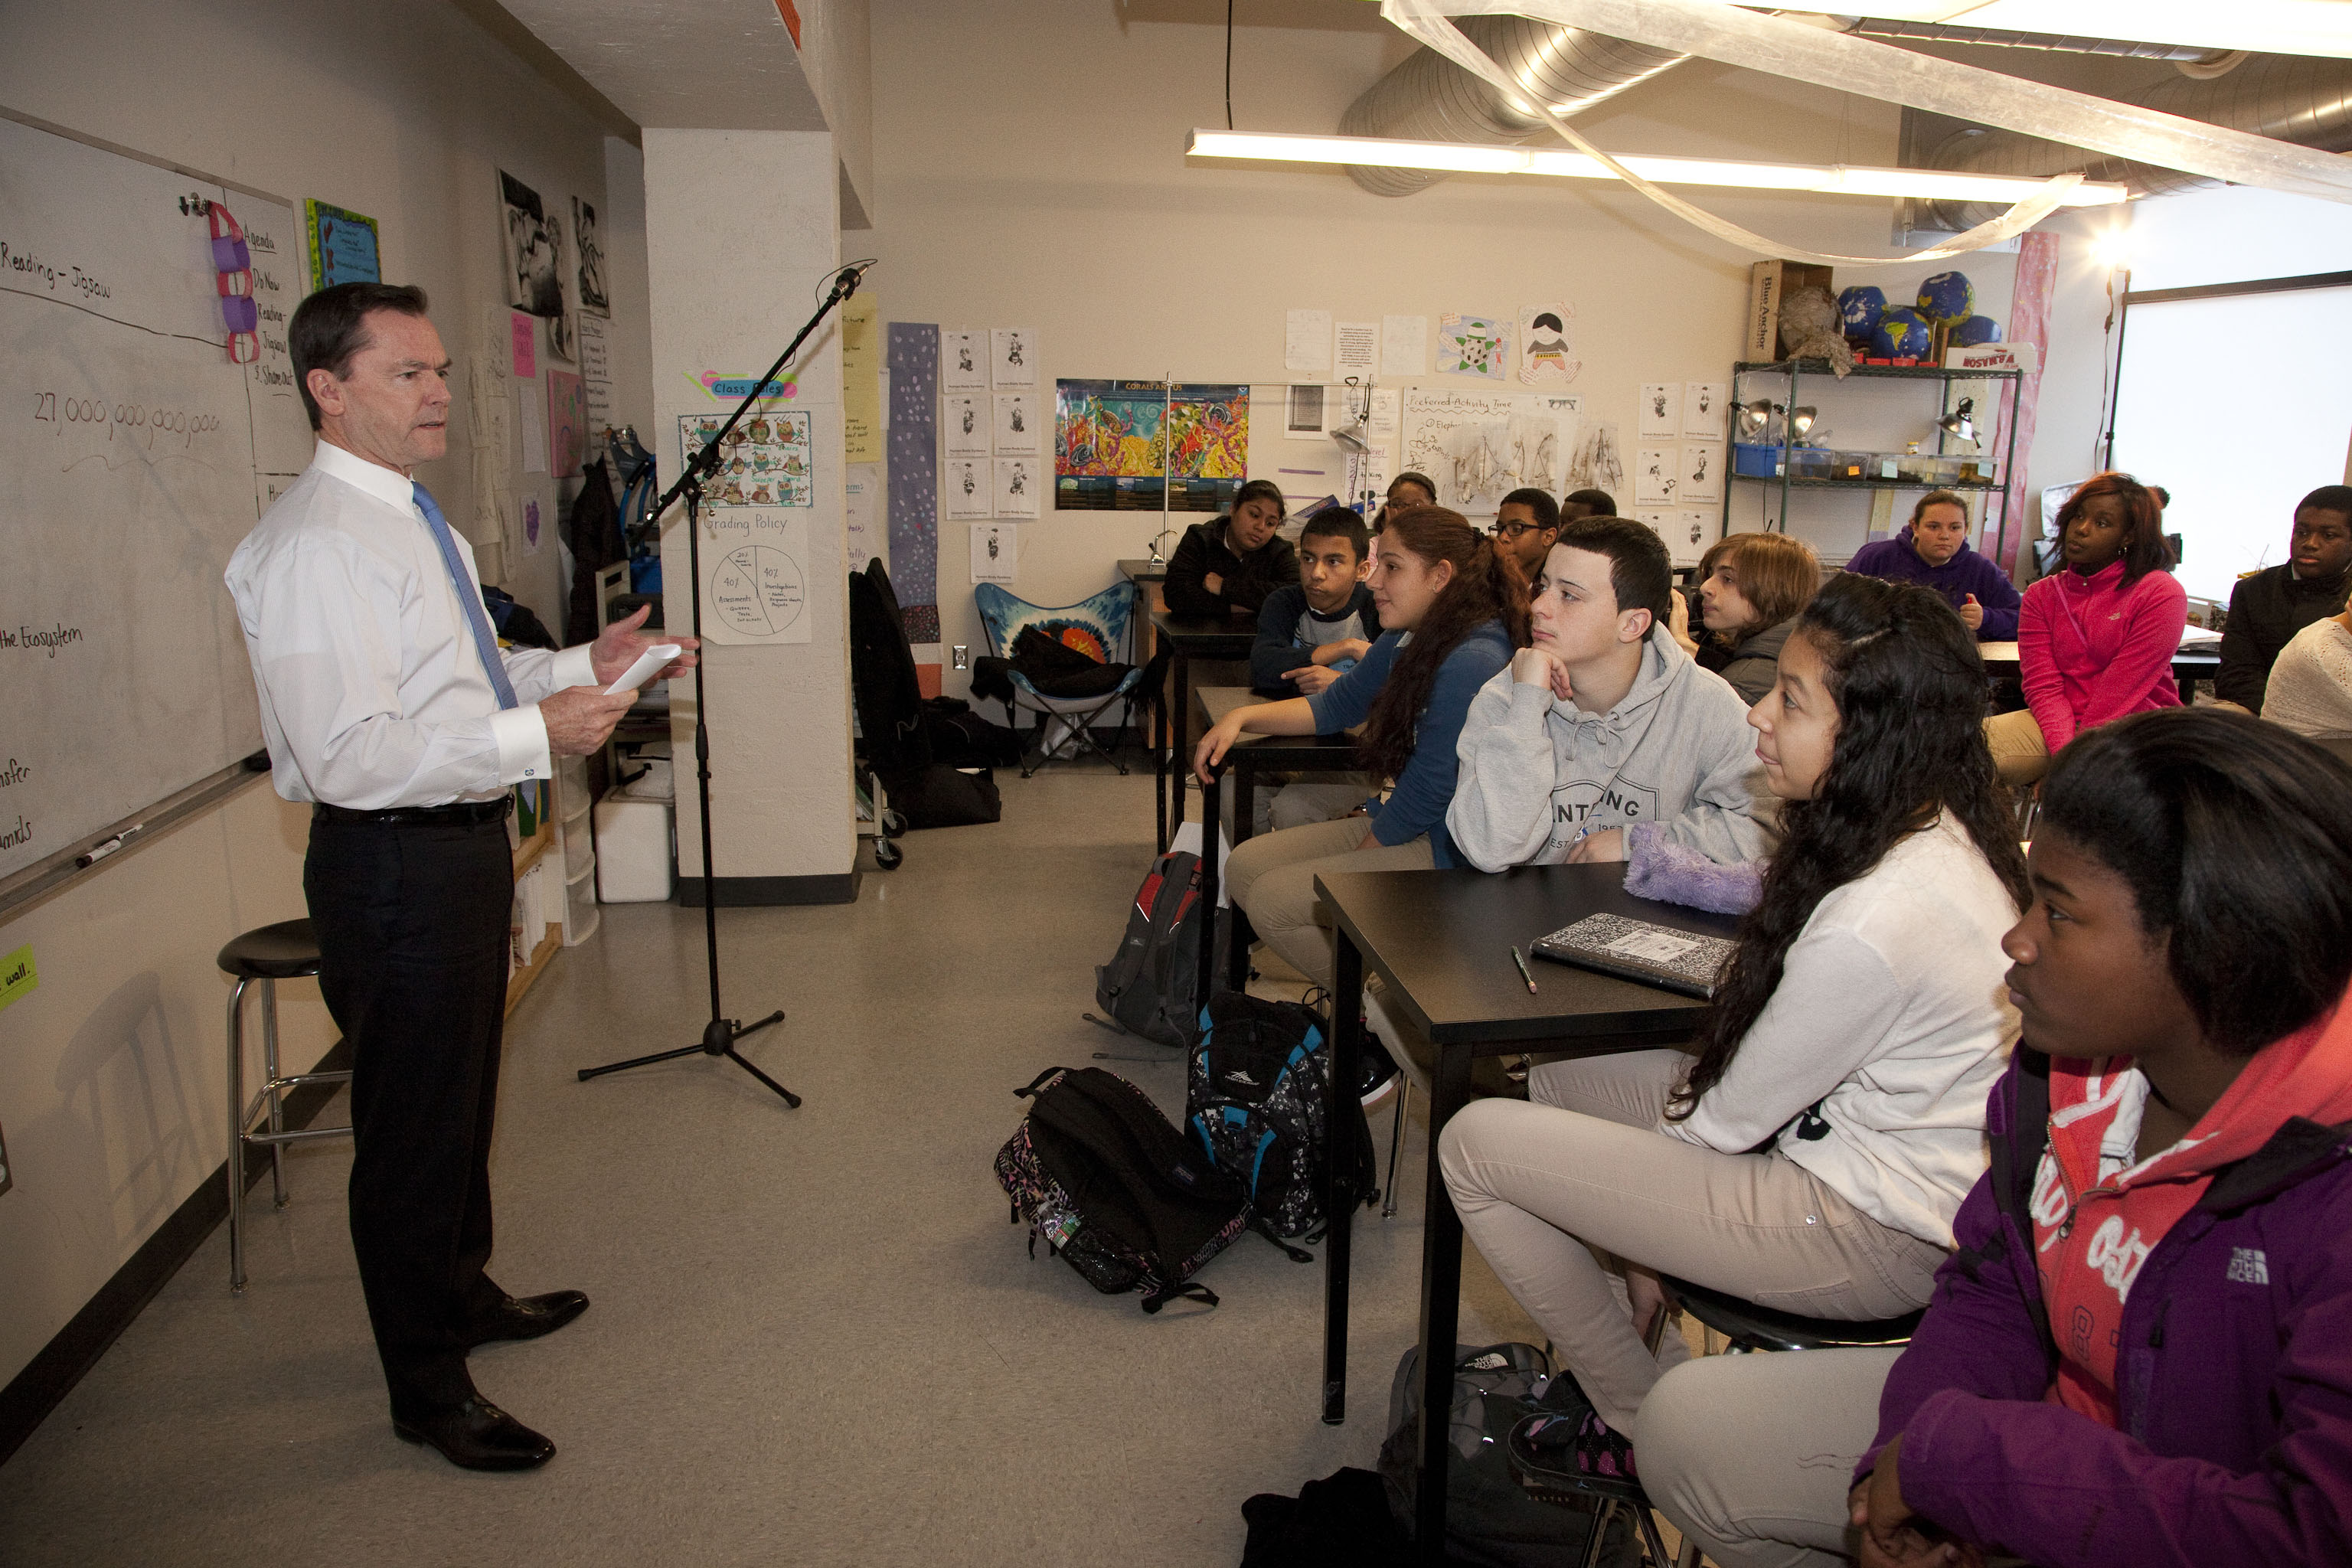 Joseph (Jay) Hooley, Chairman, President & CEO of State Street Corporation spoke to an 8th grade class at the Eliot K-8 School in the North End